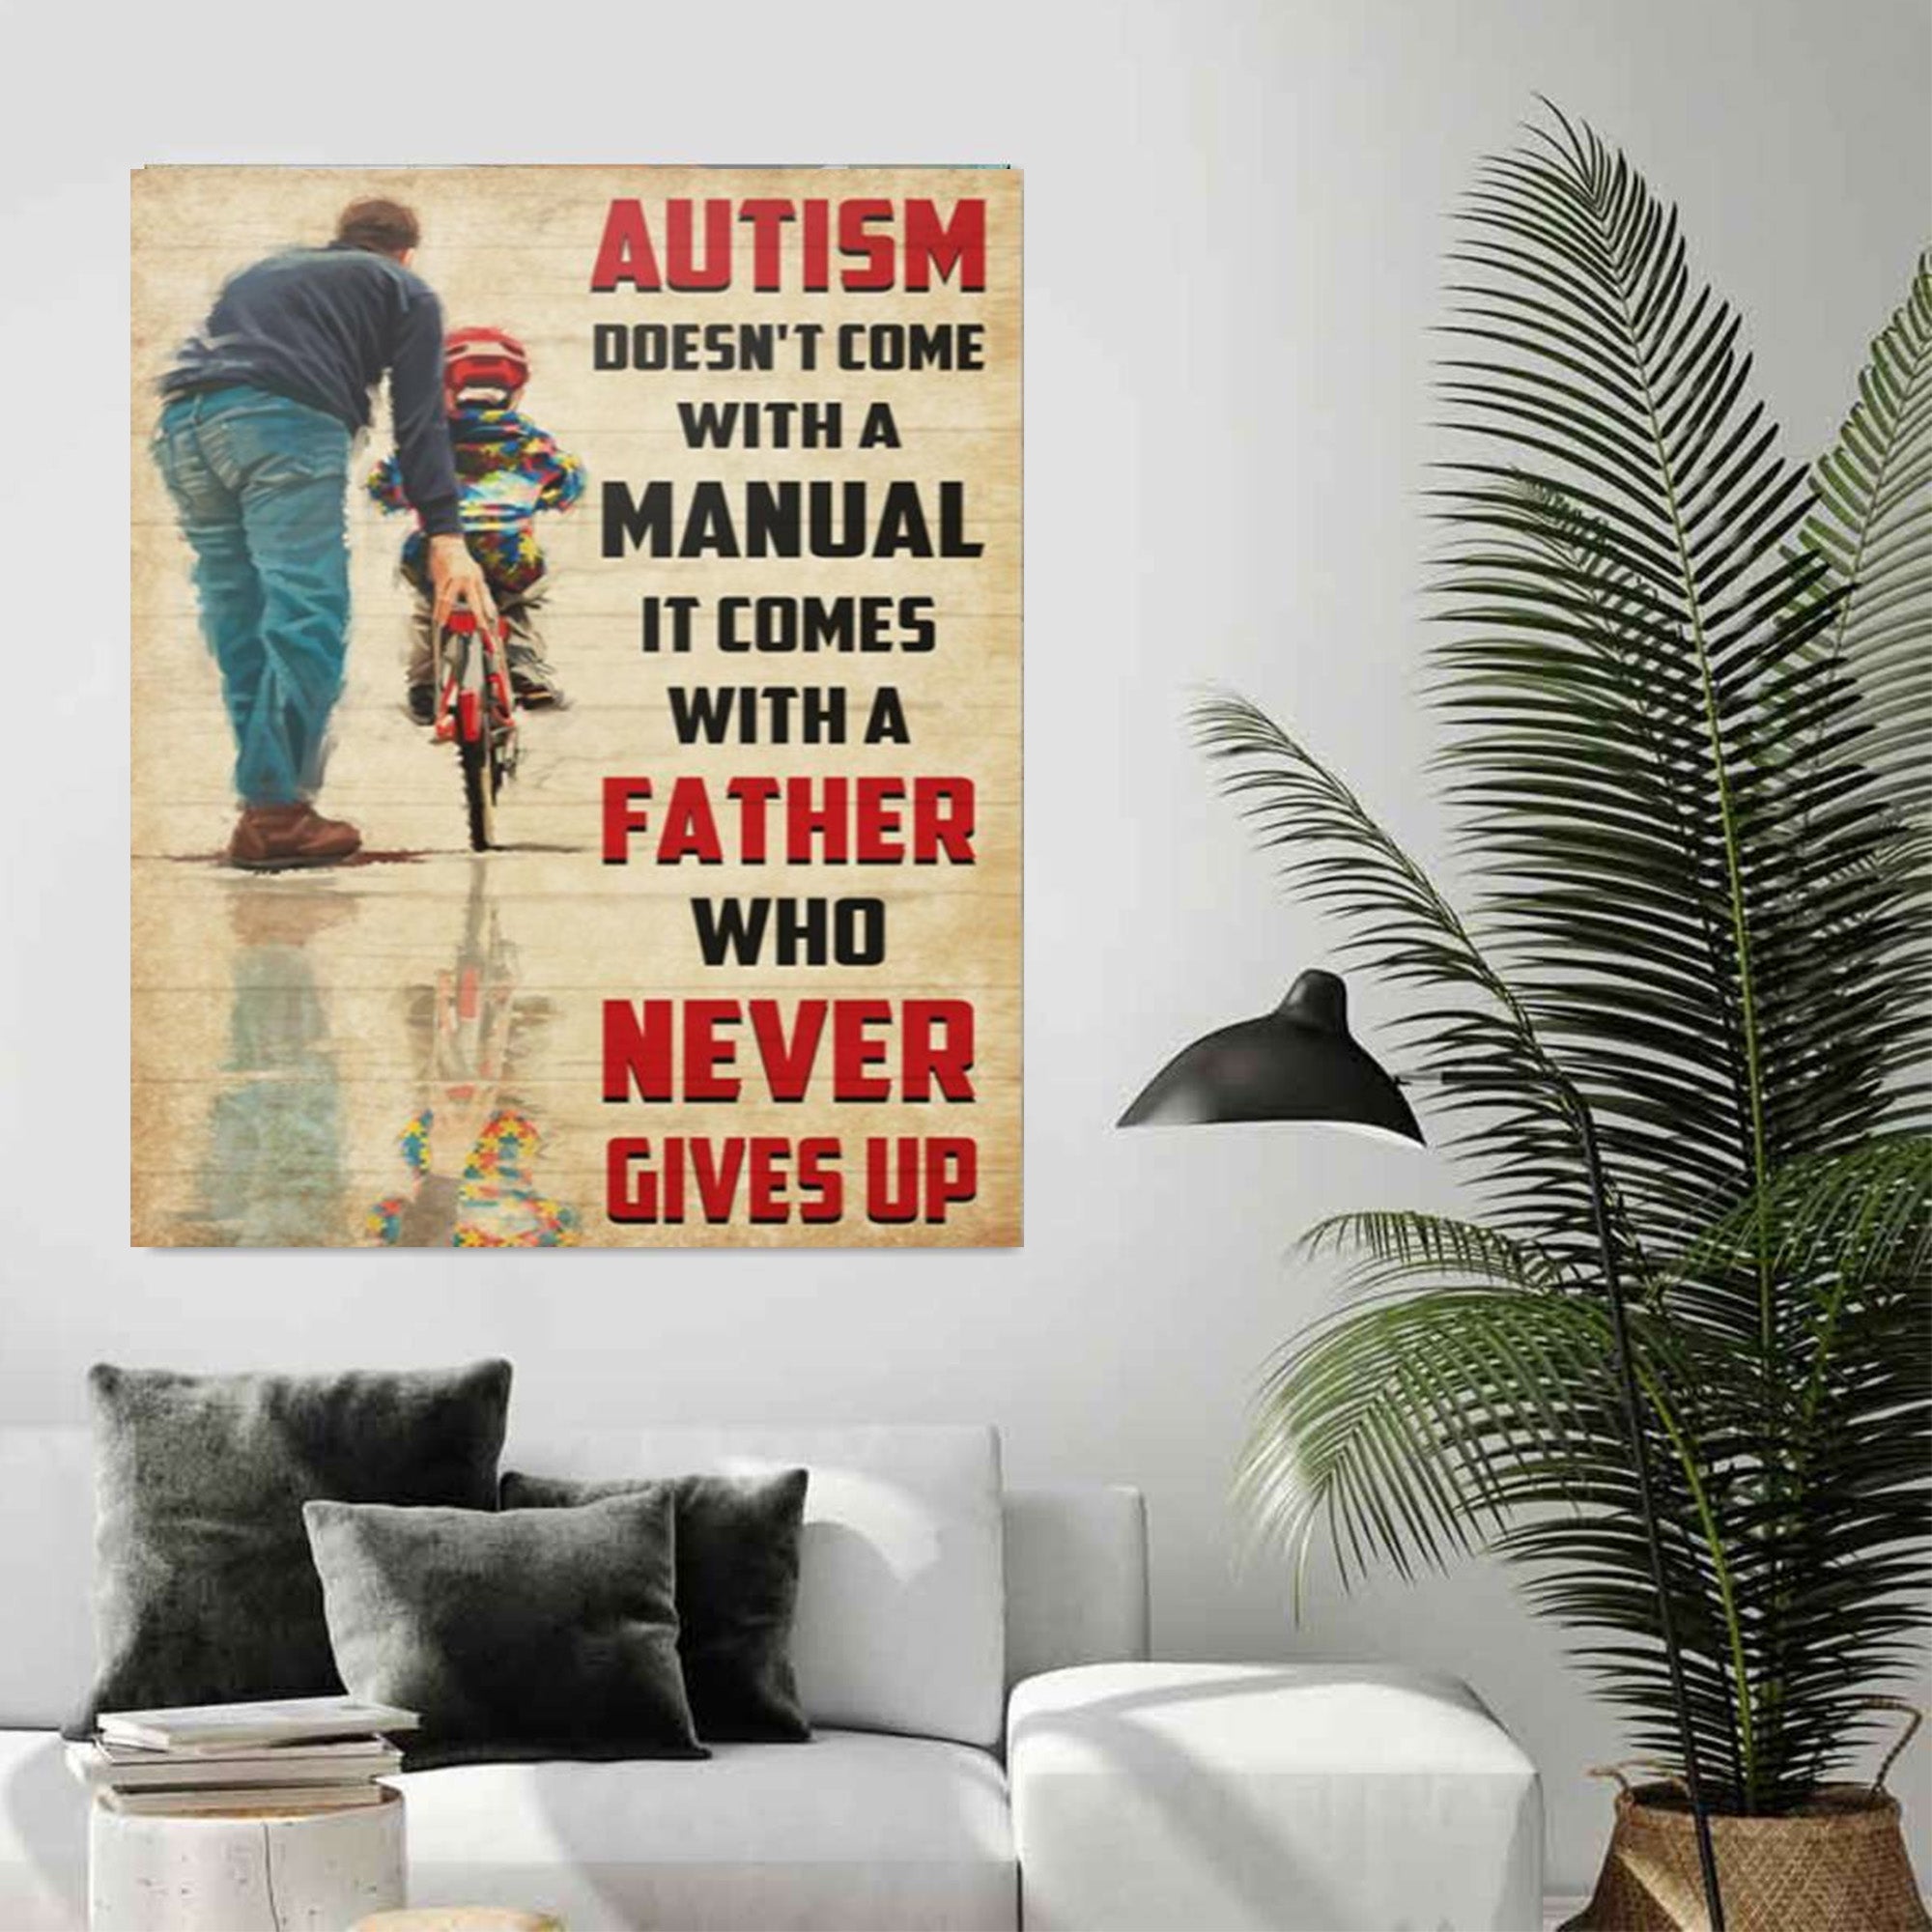 Autism Poster – Autism Doesn’t Come With A Manual It Comes With A Father